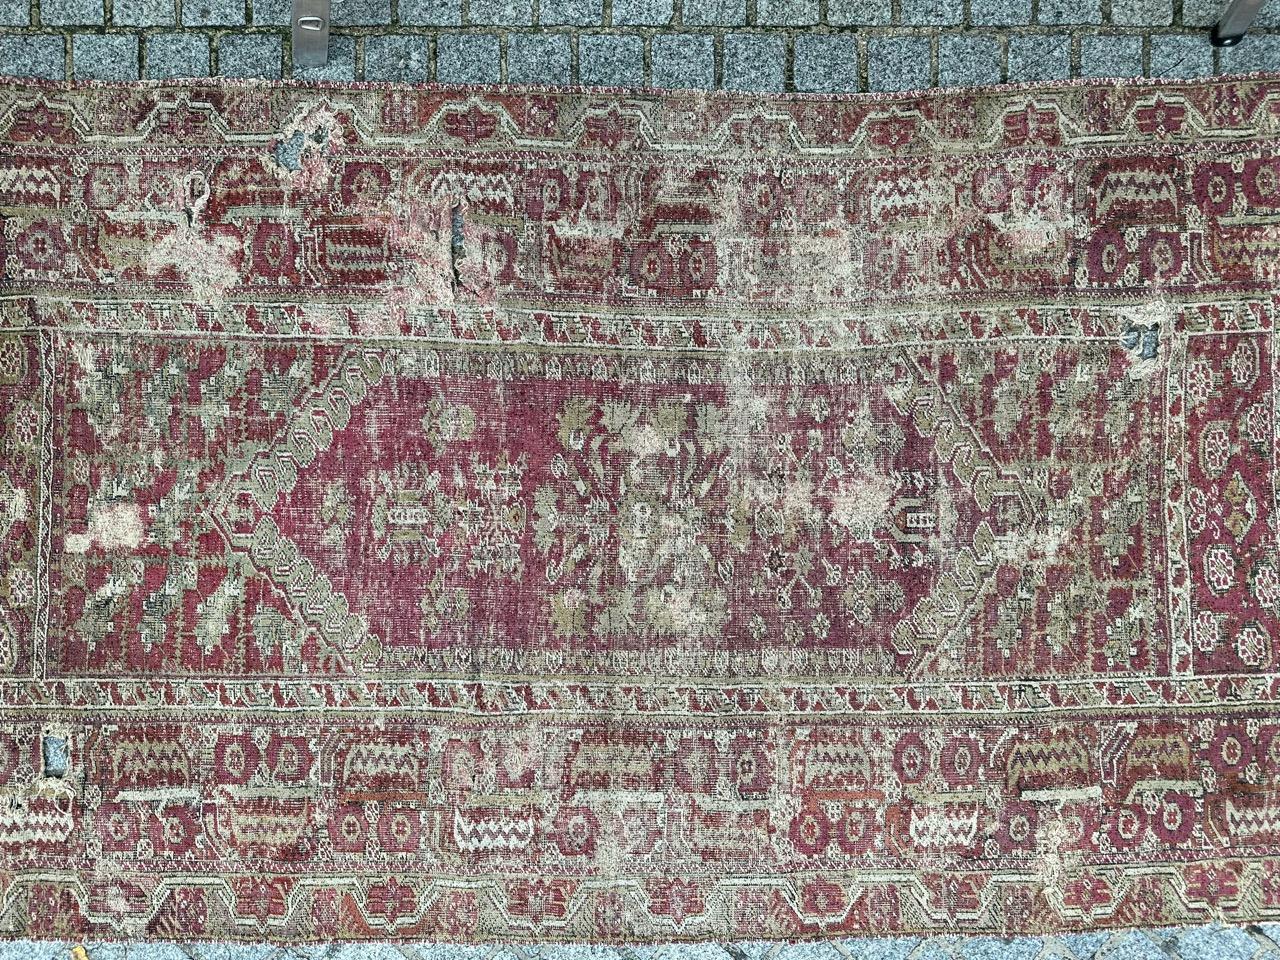 Exquisite 200-year-old Ottoman rug from the Ghyordes region in Turkey. This remarkable piece features intricate geometric and stylized patterns, with lovely natural hues of purple and orange as the background. The border is adorned with geometric